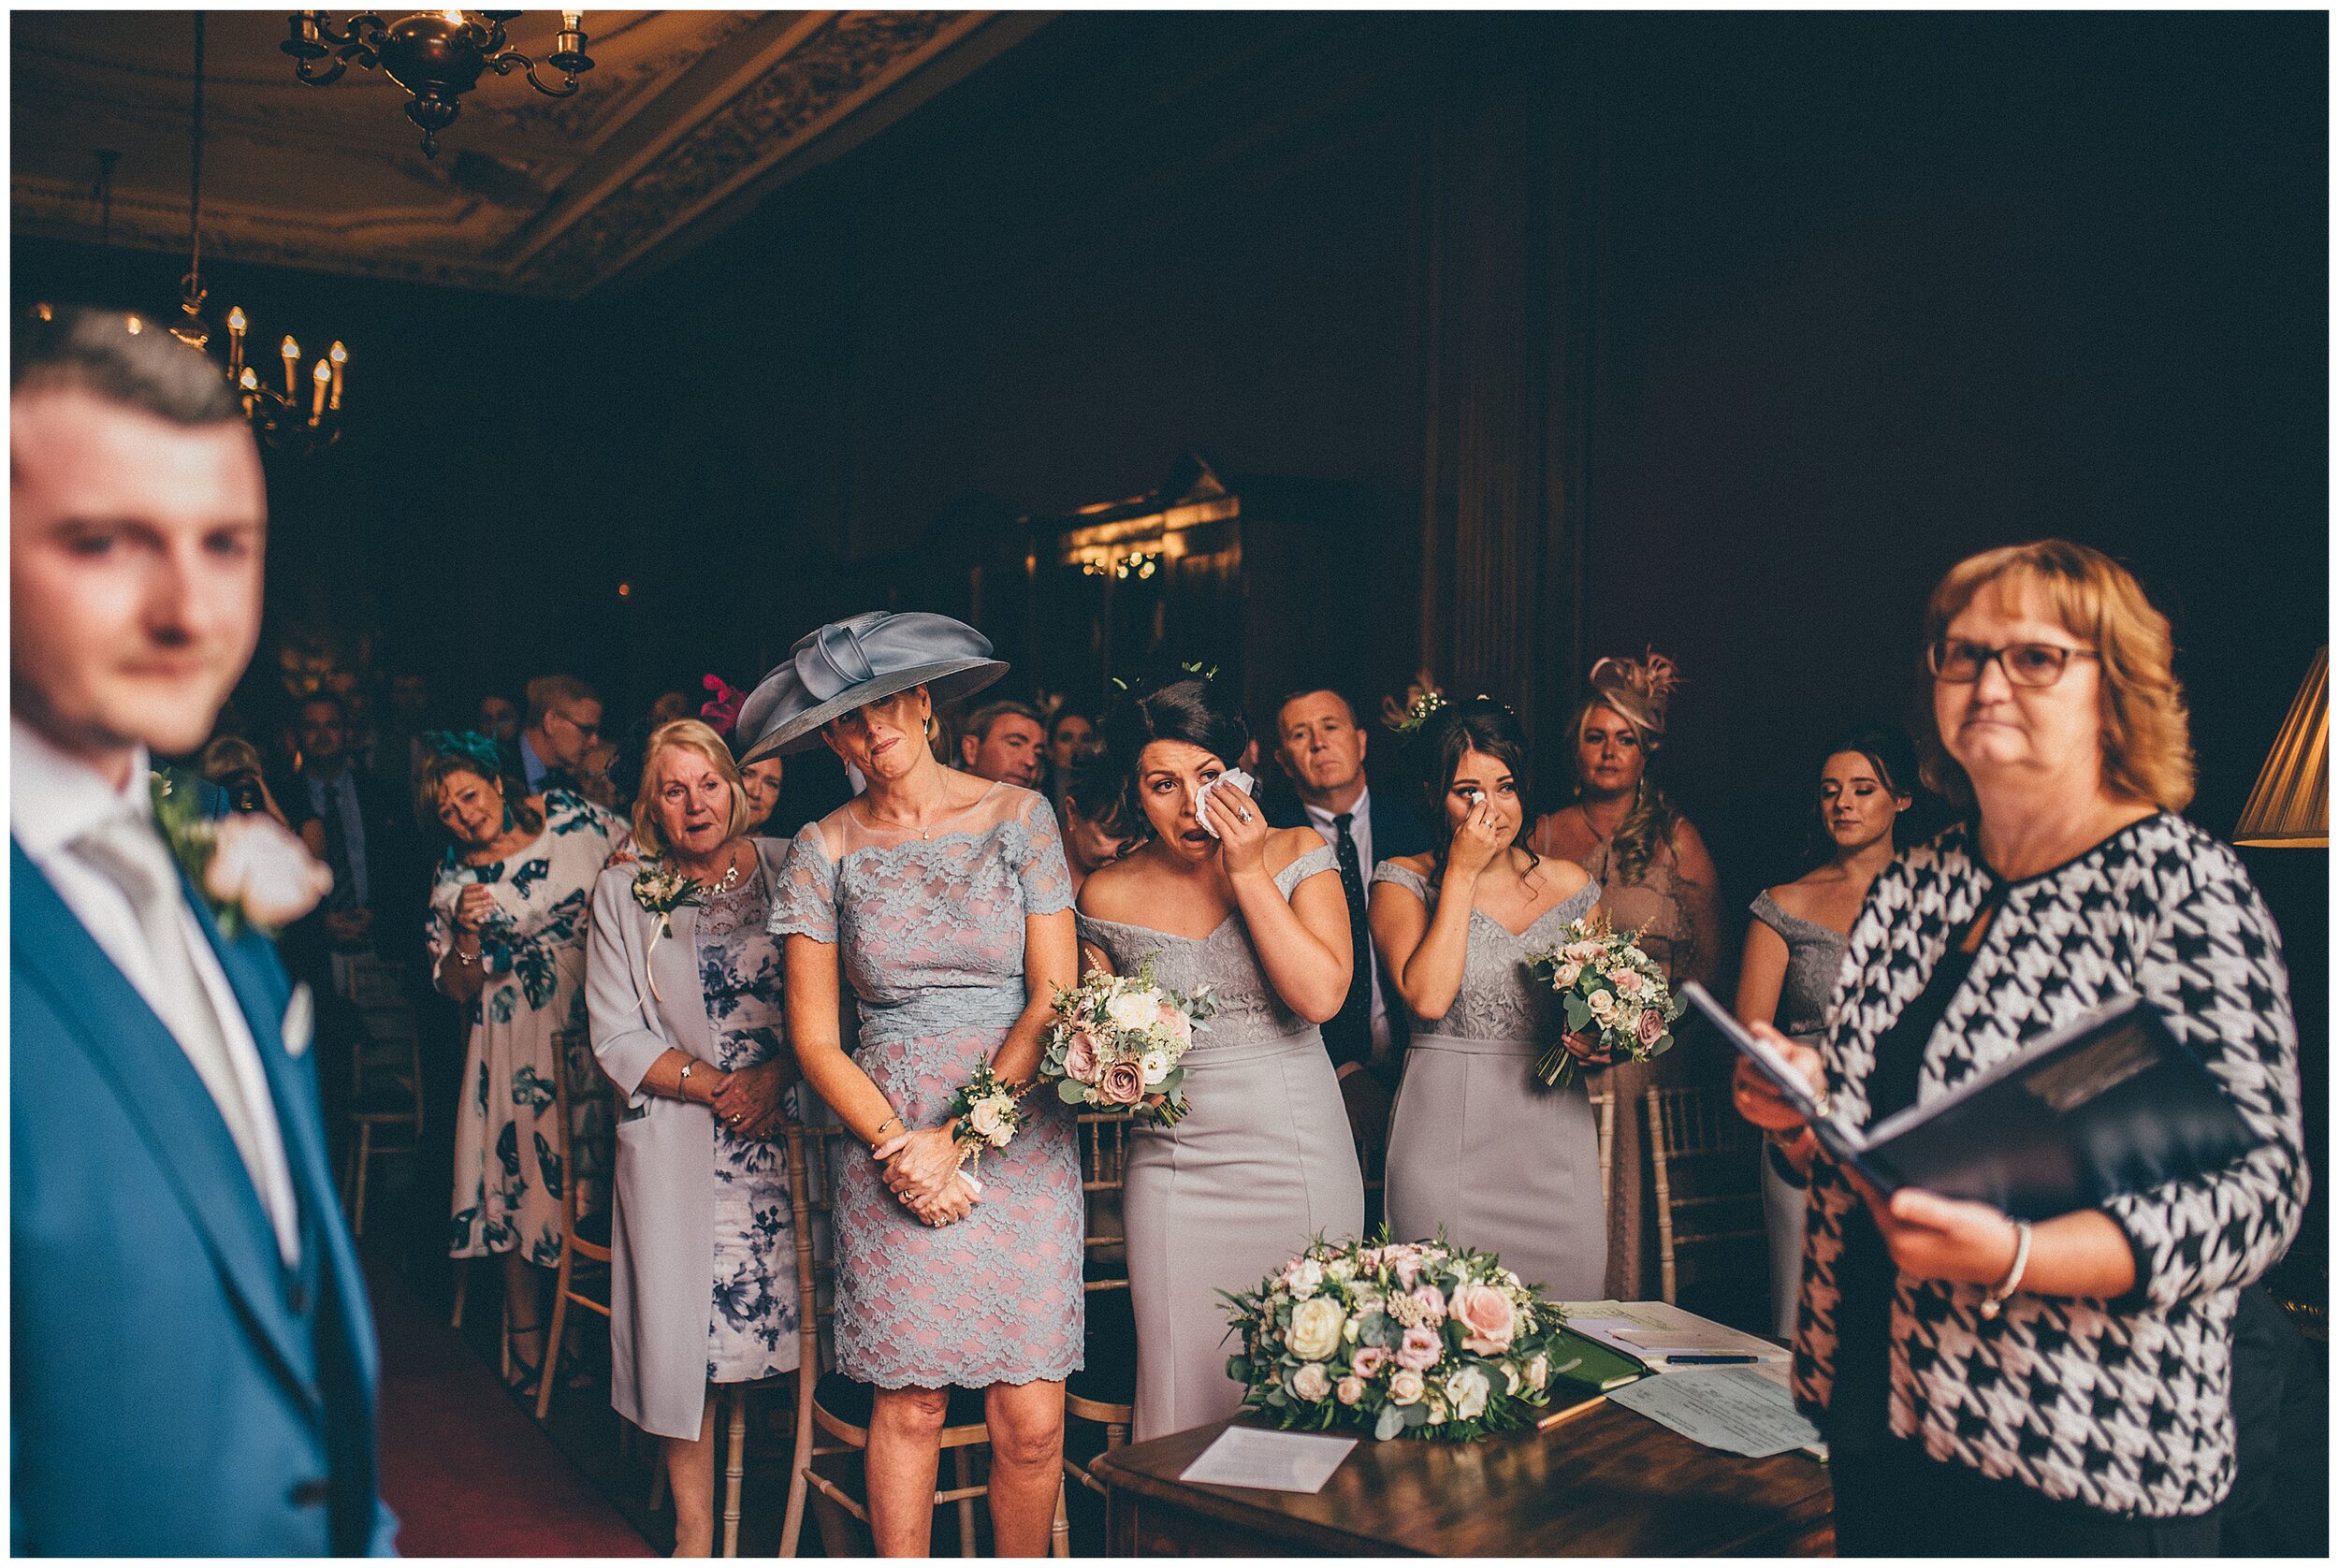 Bridesmaids all watch the bride walk towards her groom at Thornton Manor.